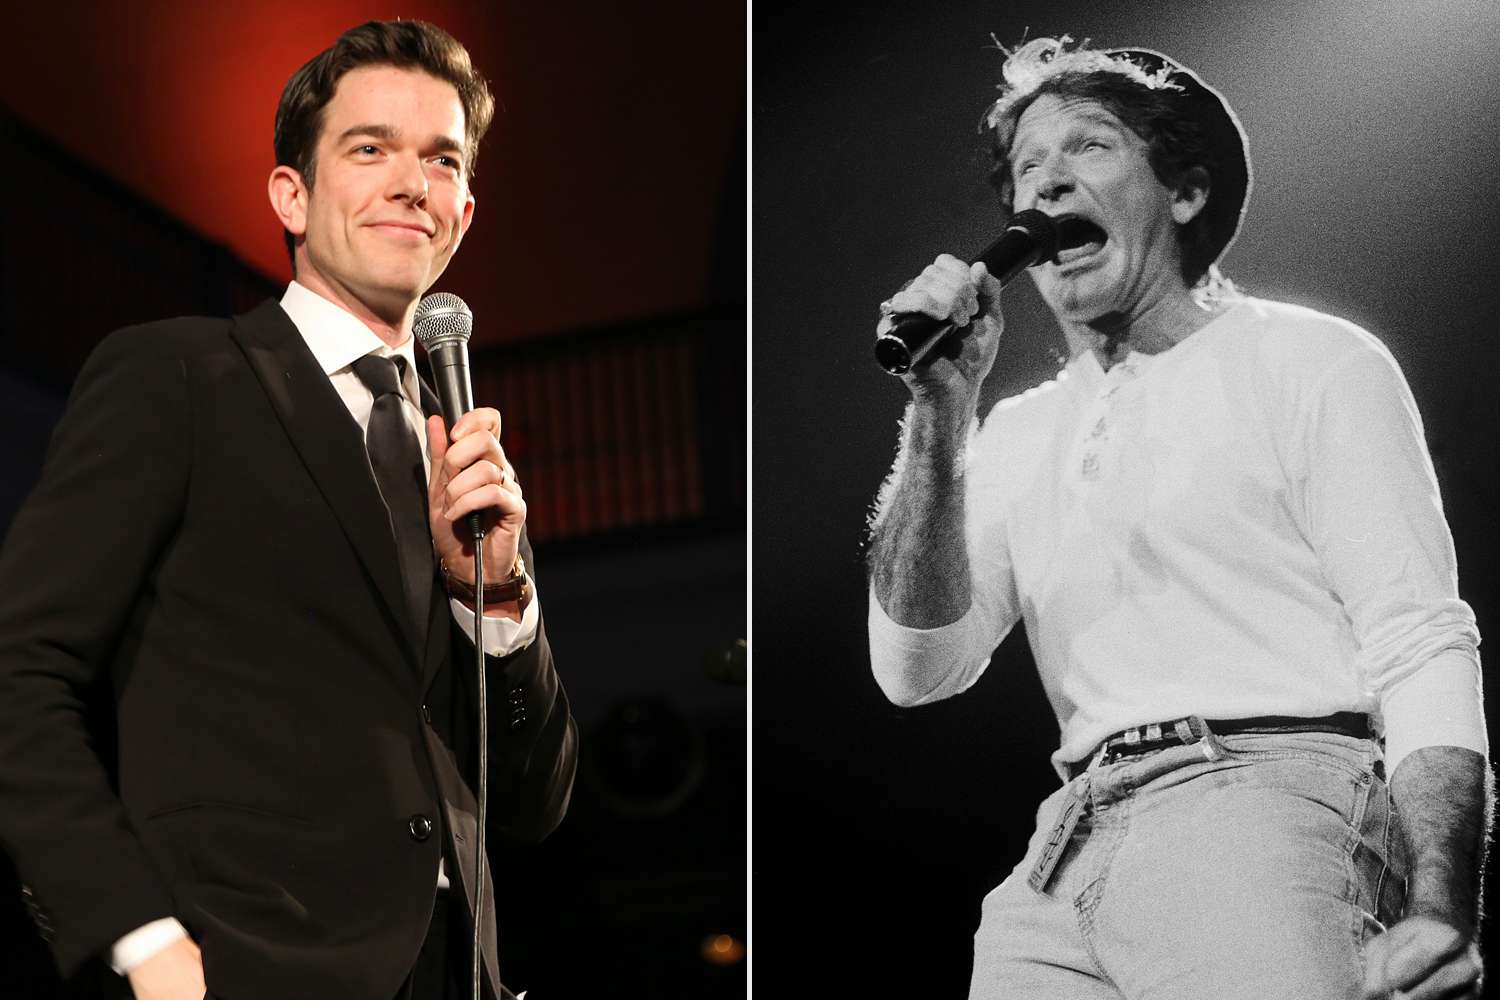 NEW YORK, NEW YORK - NOVEMBER 21: John Mulaney speaks onstage during The American Museum of Natural History's 2019 Museum Gala at American Museum of Natural History on November 21, 2019 in New York City. (Photo by Sylvain Gaboury/Patrick McMullan via Getty Images); American comedian Robin Williams (1951 - 2014) performs onstage at the Rosemont Horizon, Rosemont, Illinois, September 6, 1992. (Photo by Paul Natkin/Getty Images)